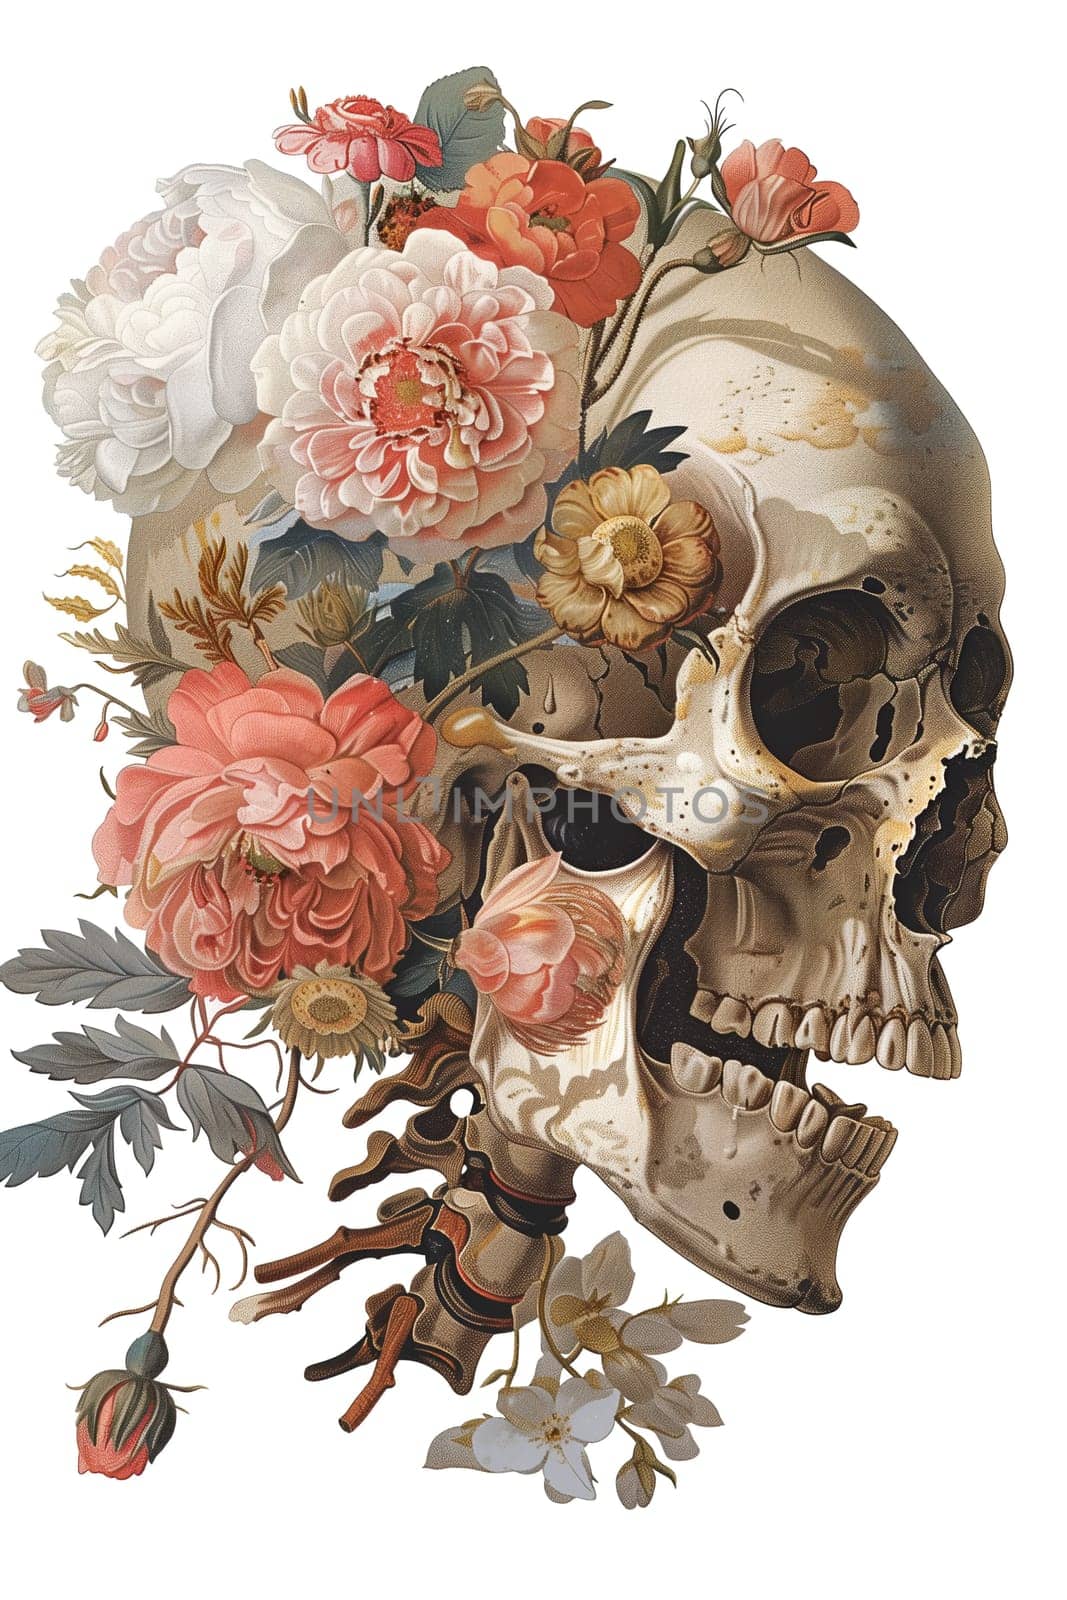 Vintage Illustration of skull with flowers by Dustick